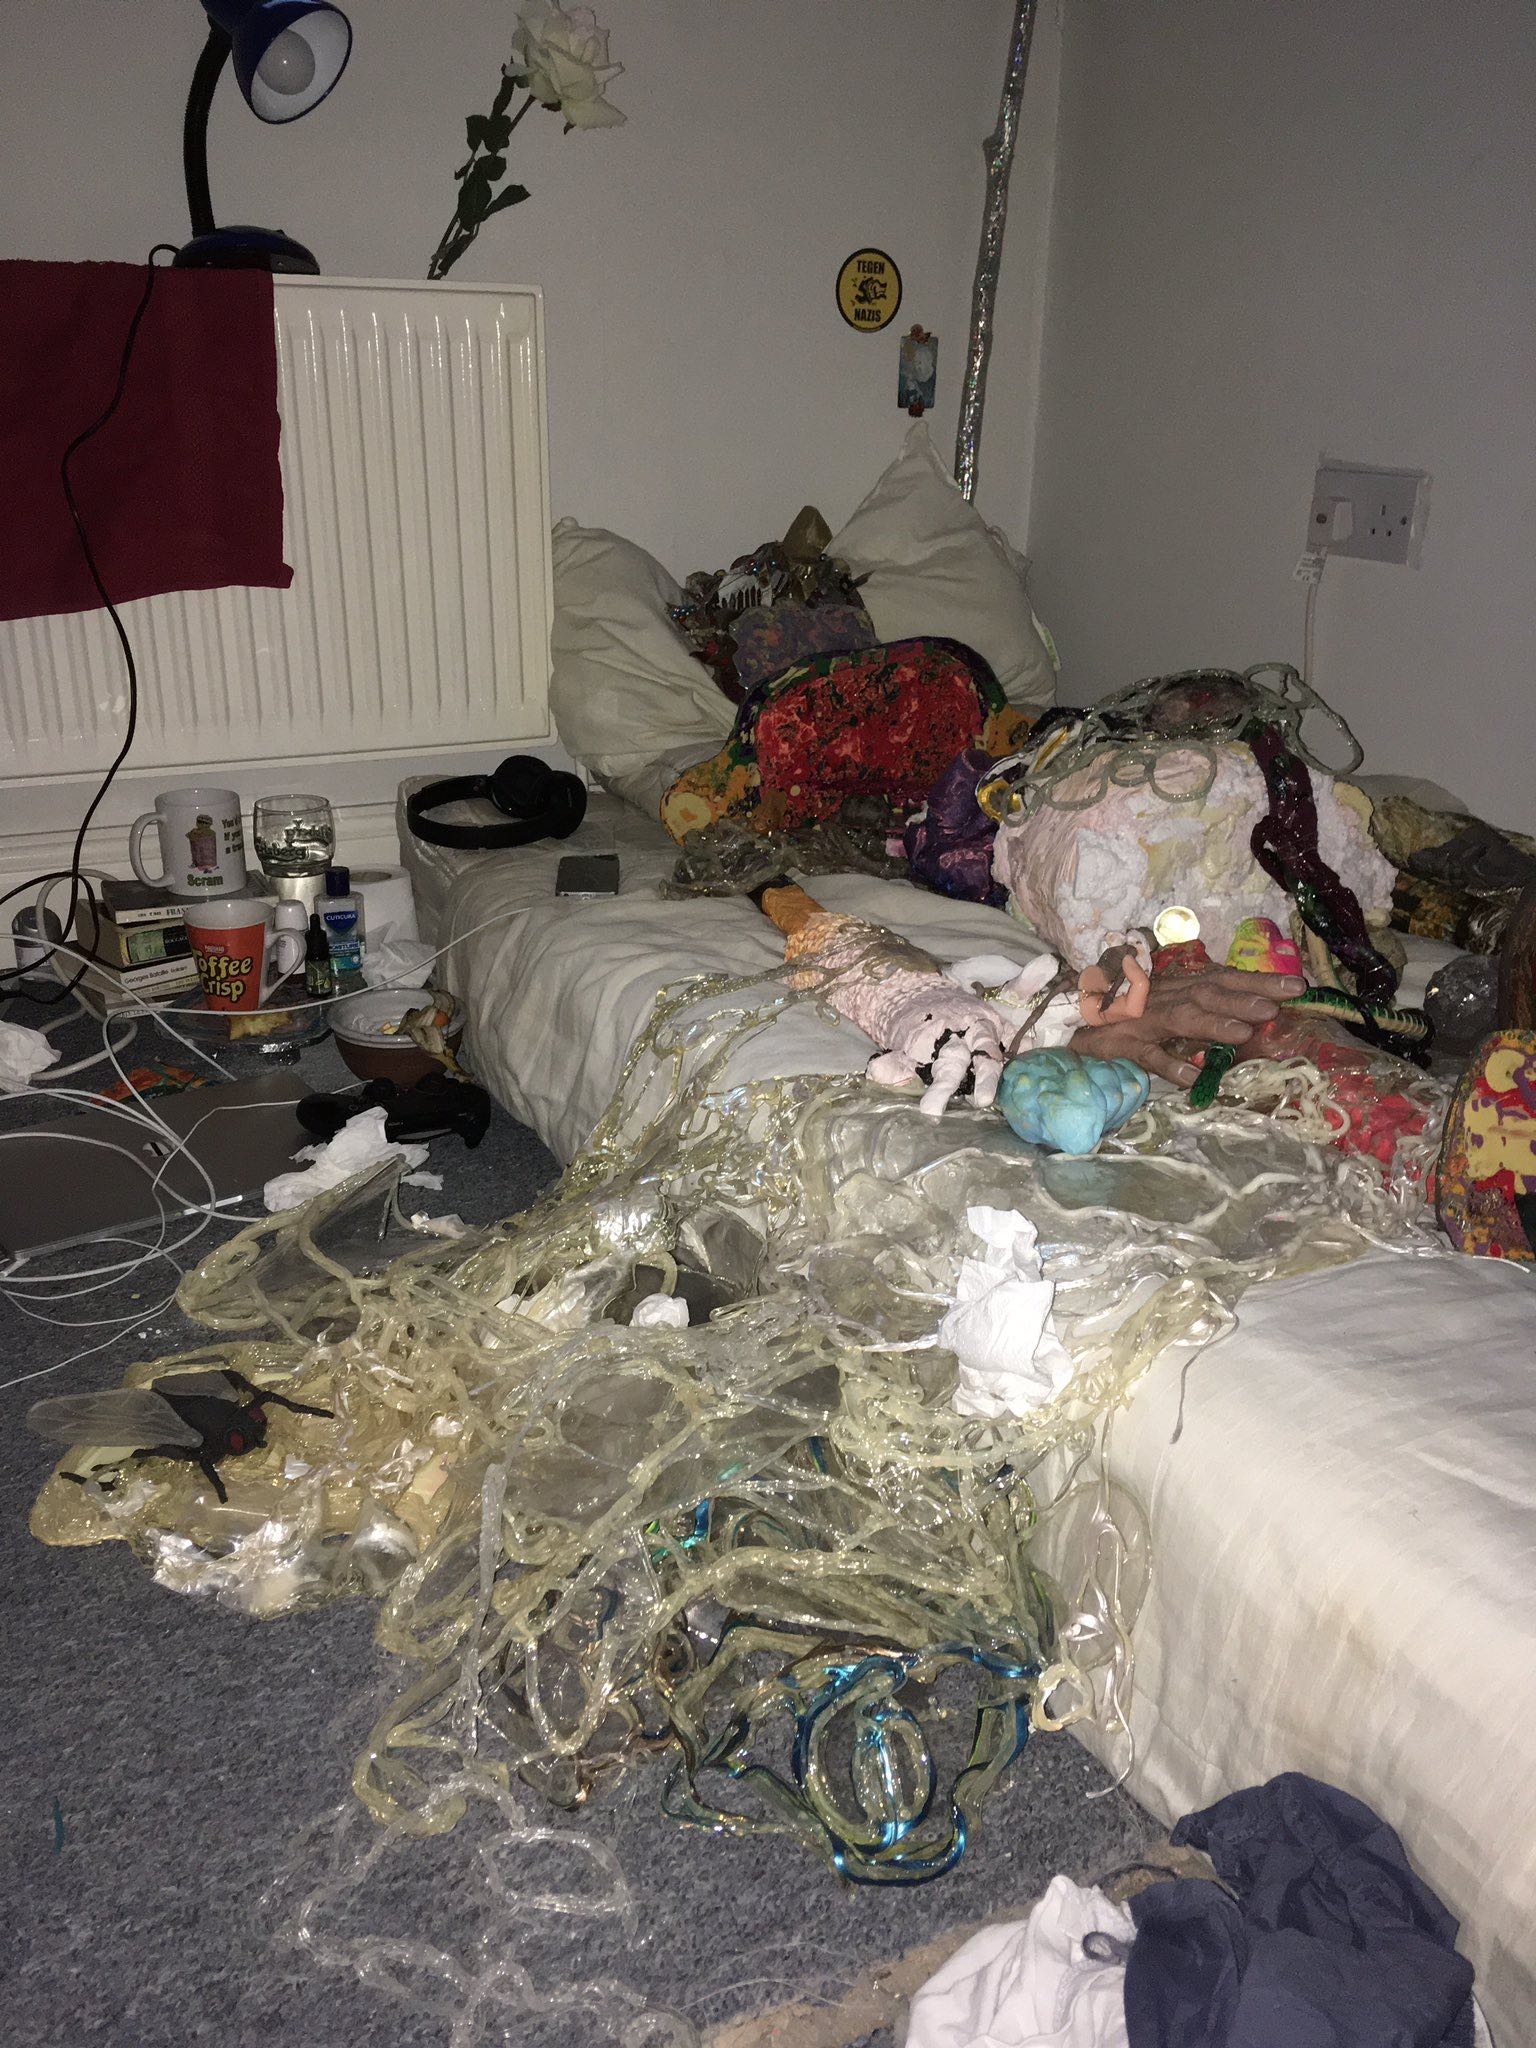 A photo taken with the flash on of the corner of a cluttered and messy bedroom. The mattress on the floor has no sheets and a figure lays on it made from a combination of smaller colourful sculptural objects and materials